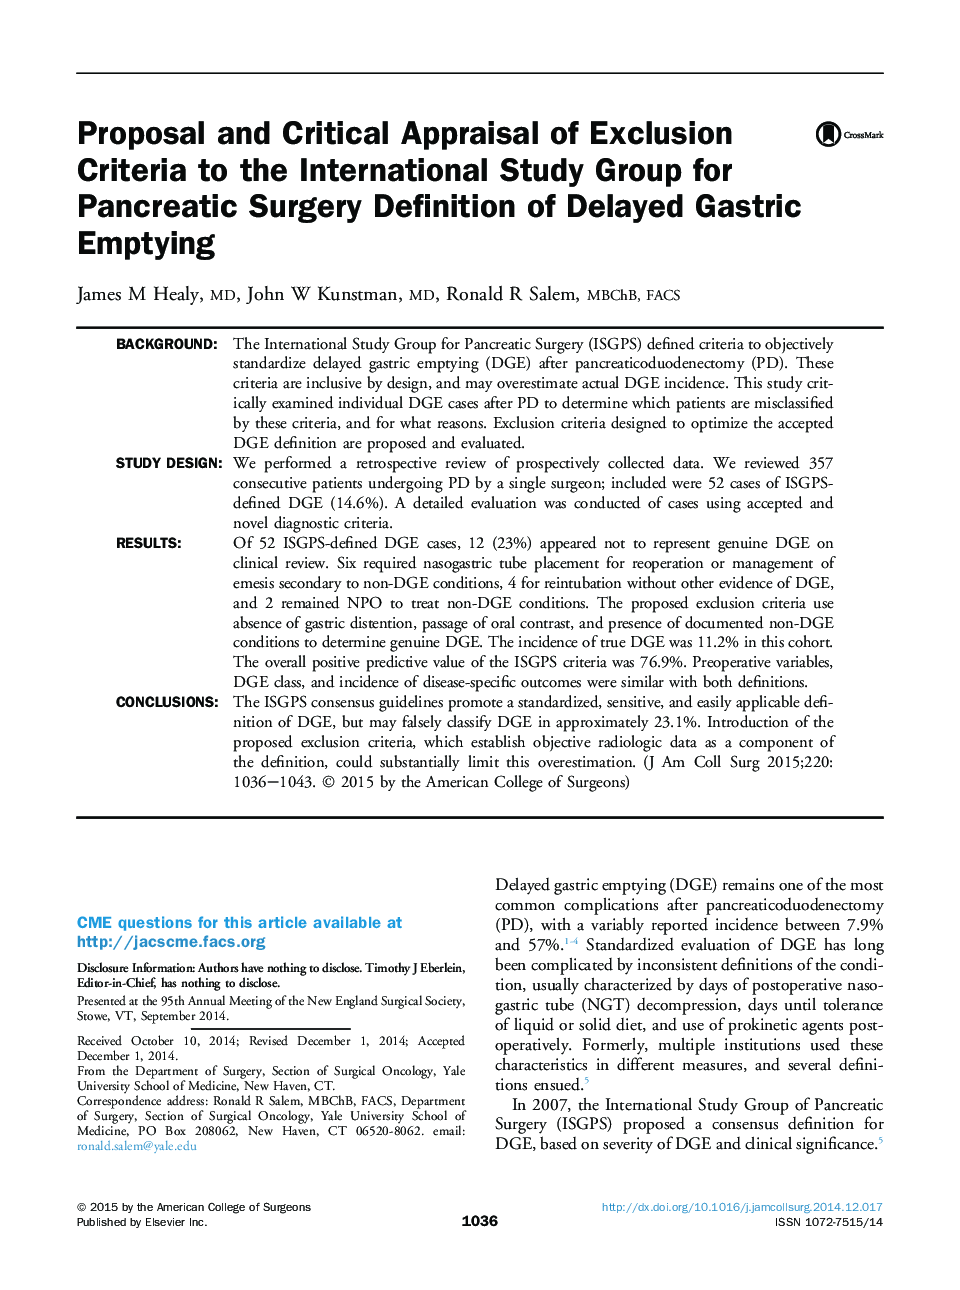 Proposal and Critical Appraisal of Exclusion Criteria to the International Study Group for Pancreatic Surgery Definition of Delayed Gastric Emptying